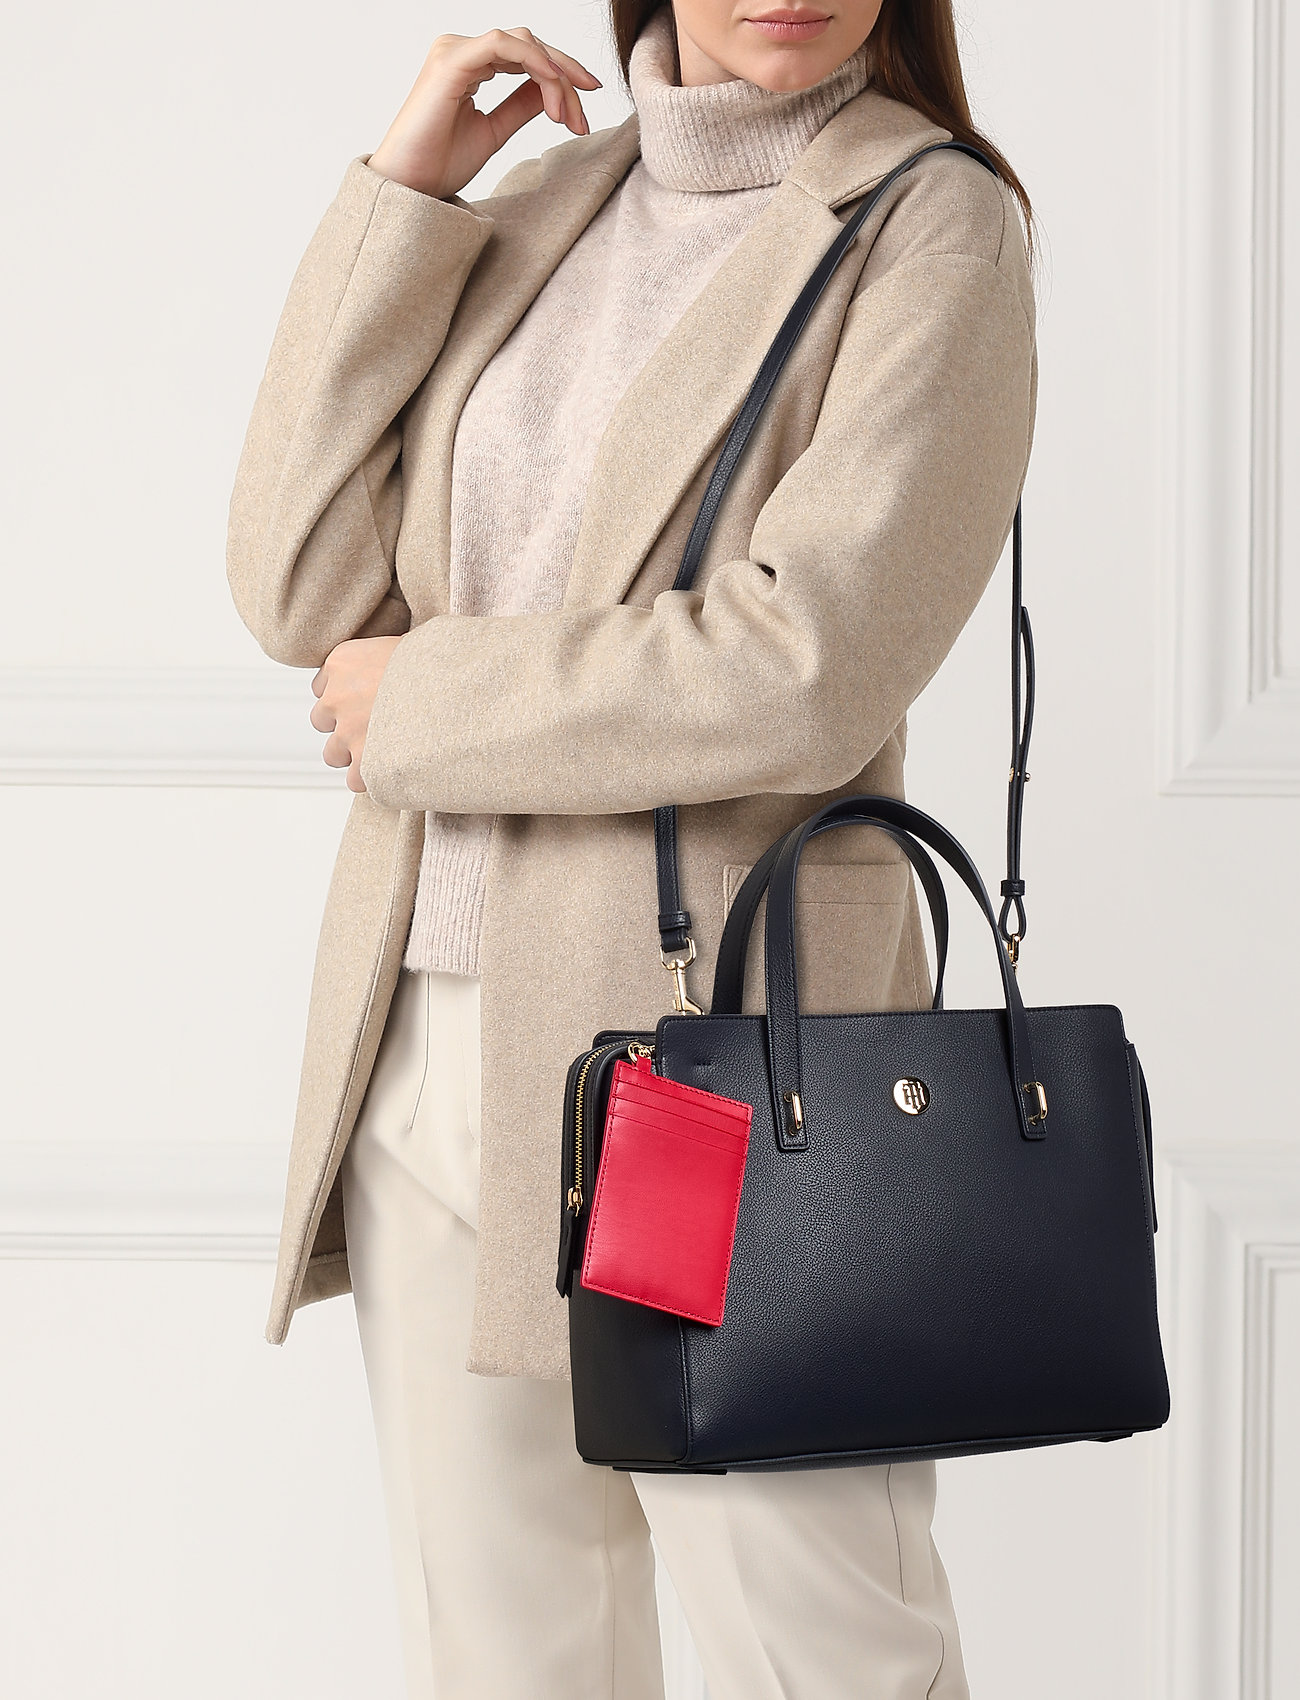 charming tommy satchel